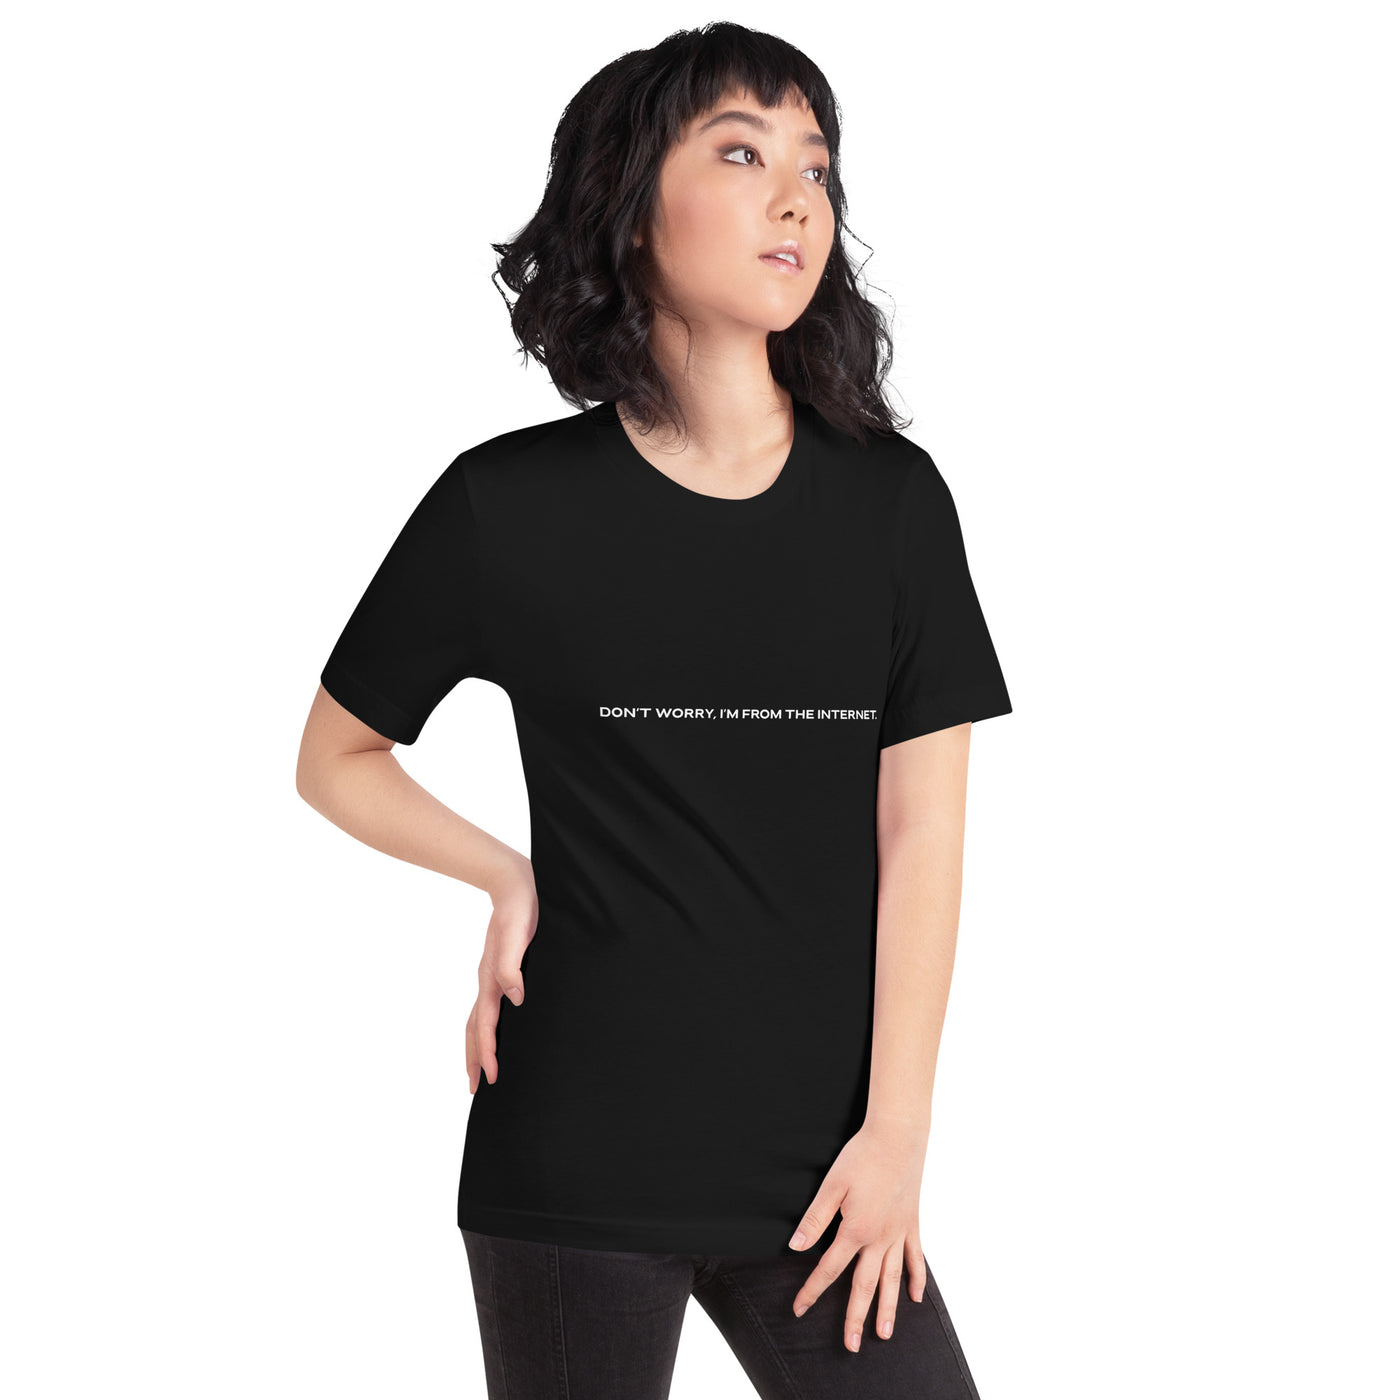 Don't worry I am from the Internet V1 - Unisex t-shirt